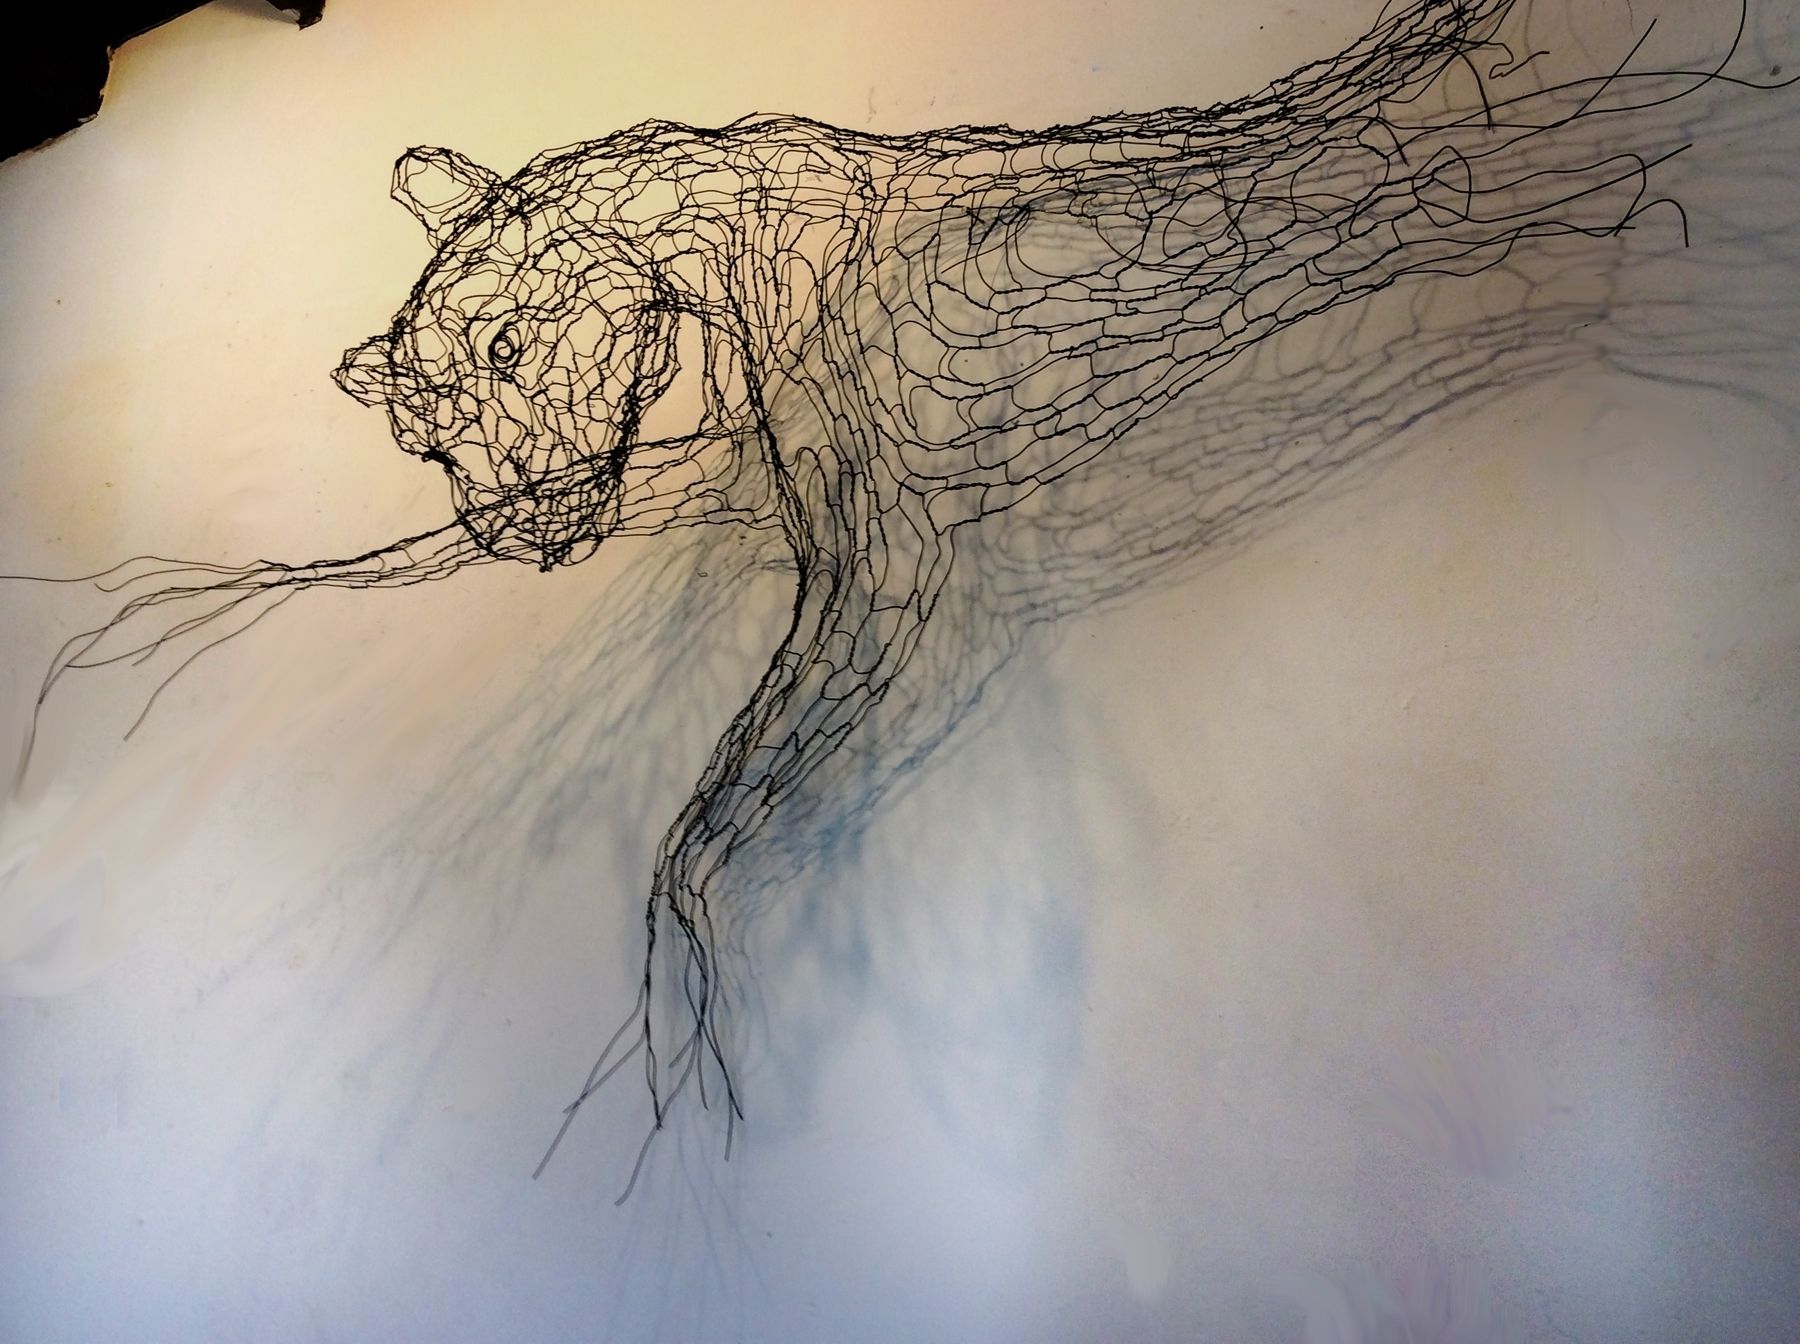 Wire Wall Art | Wire Sculpture And Illustration Throughout Wire Wall Art (View 11 of 20)